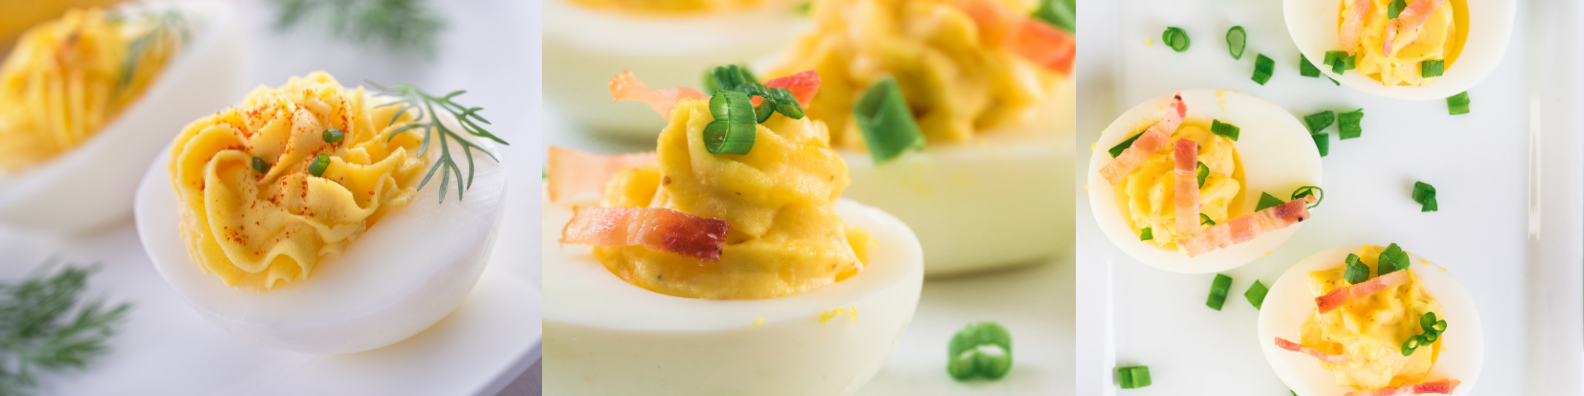 Easy Deviled Eggs recipe champagne pairing toast